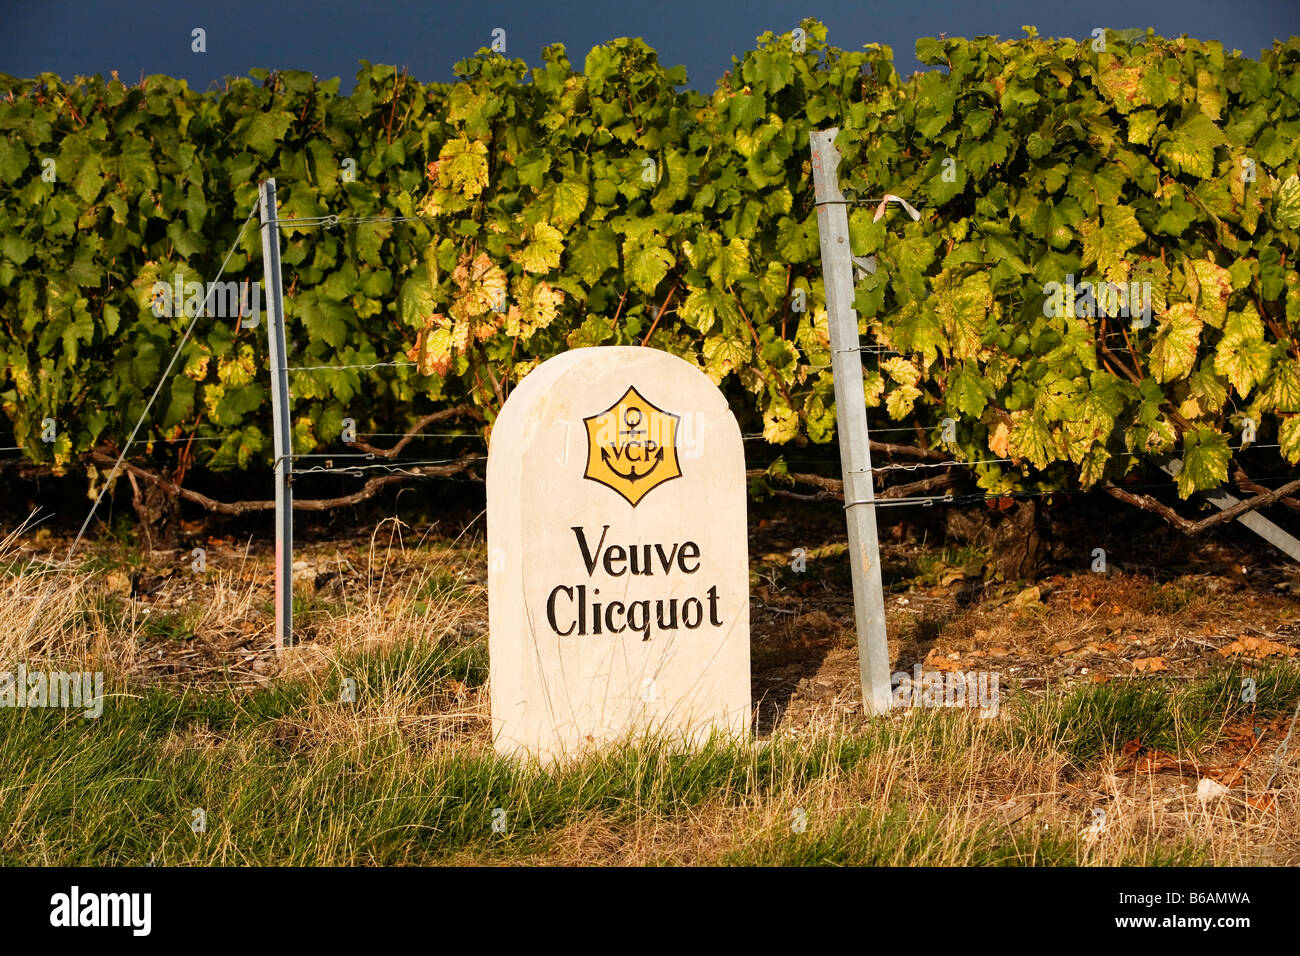 Sign of the Veuve Clicquot Champagne winery in the vineyards near